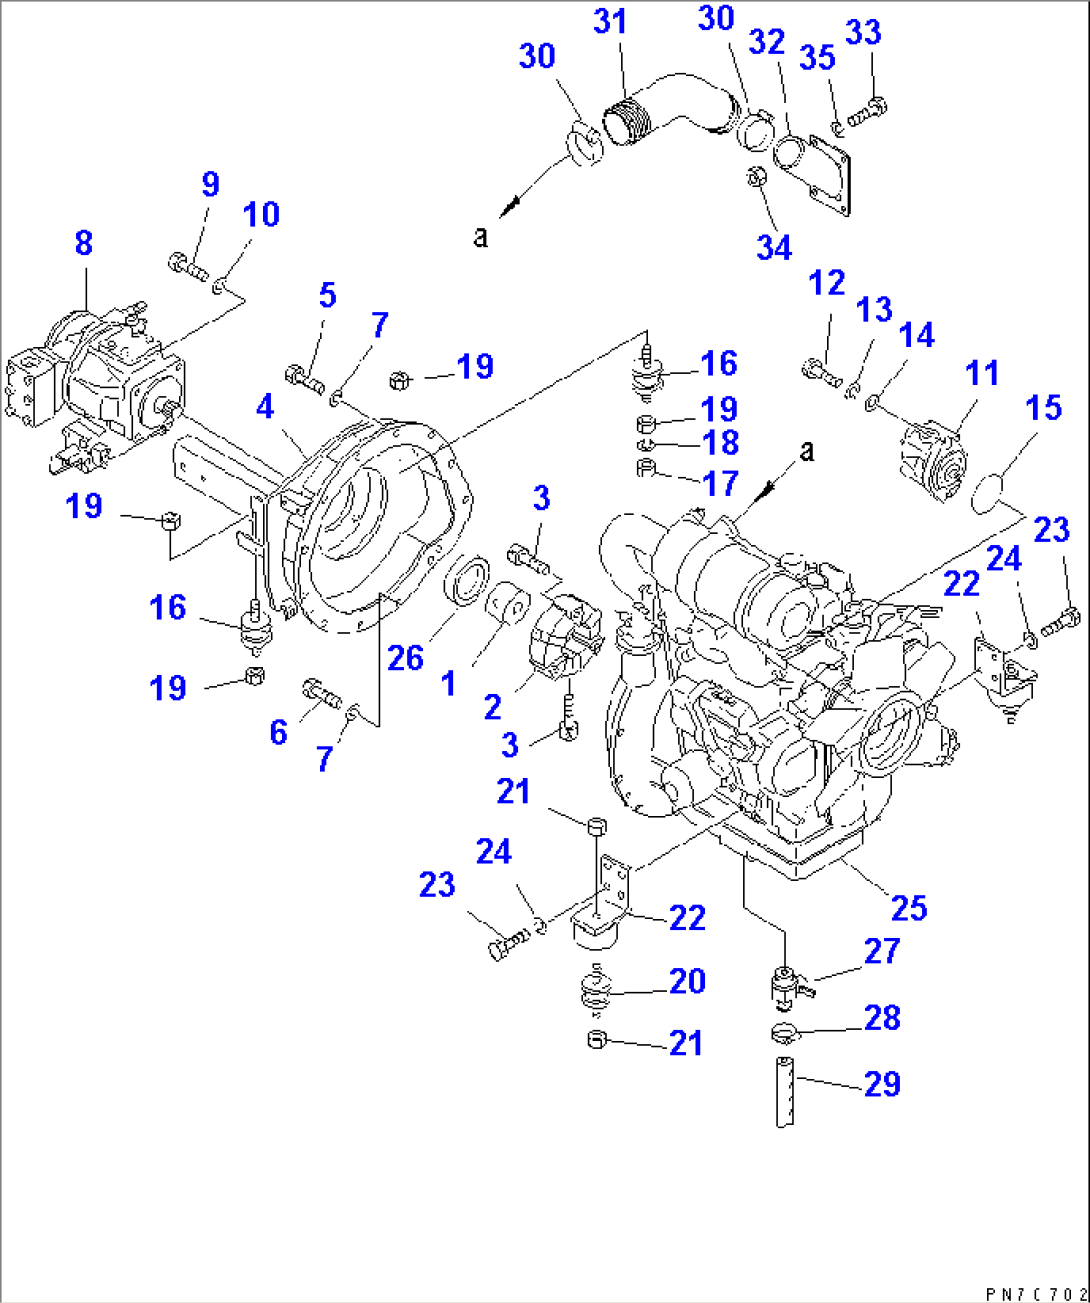 ENGINE AND PUMP MOUNTING PARTS(#5210-)